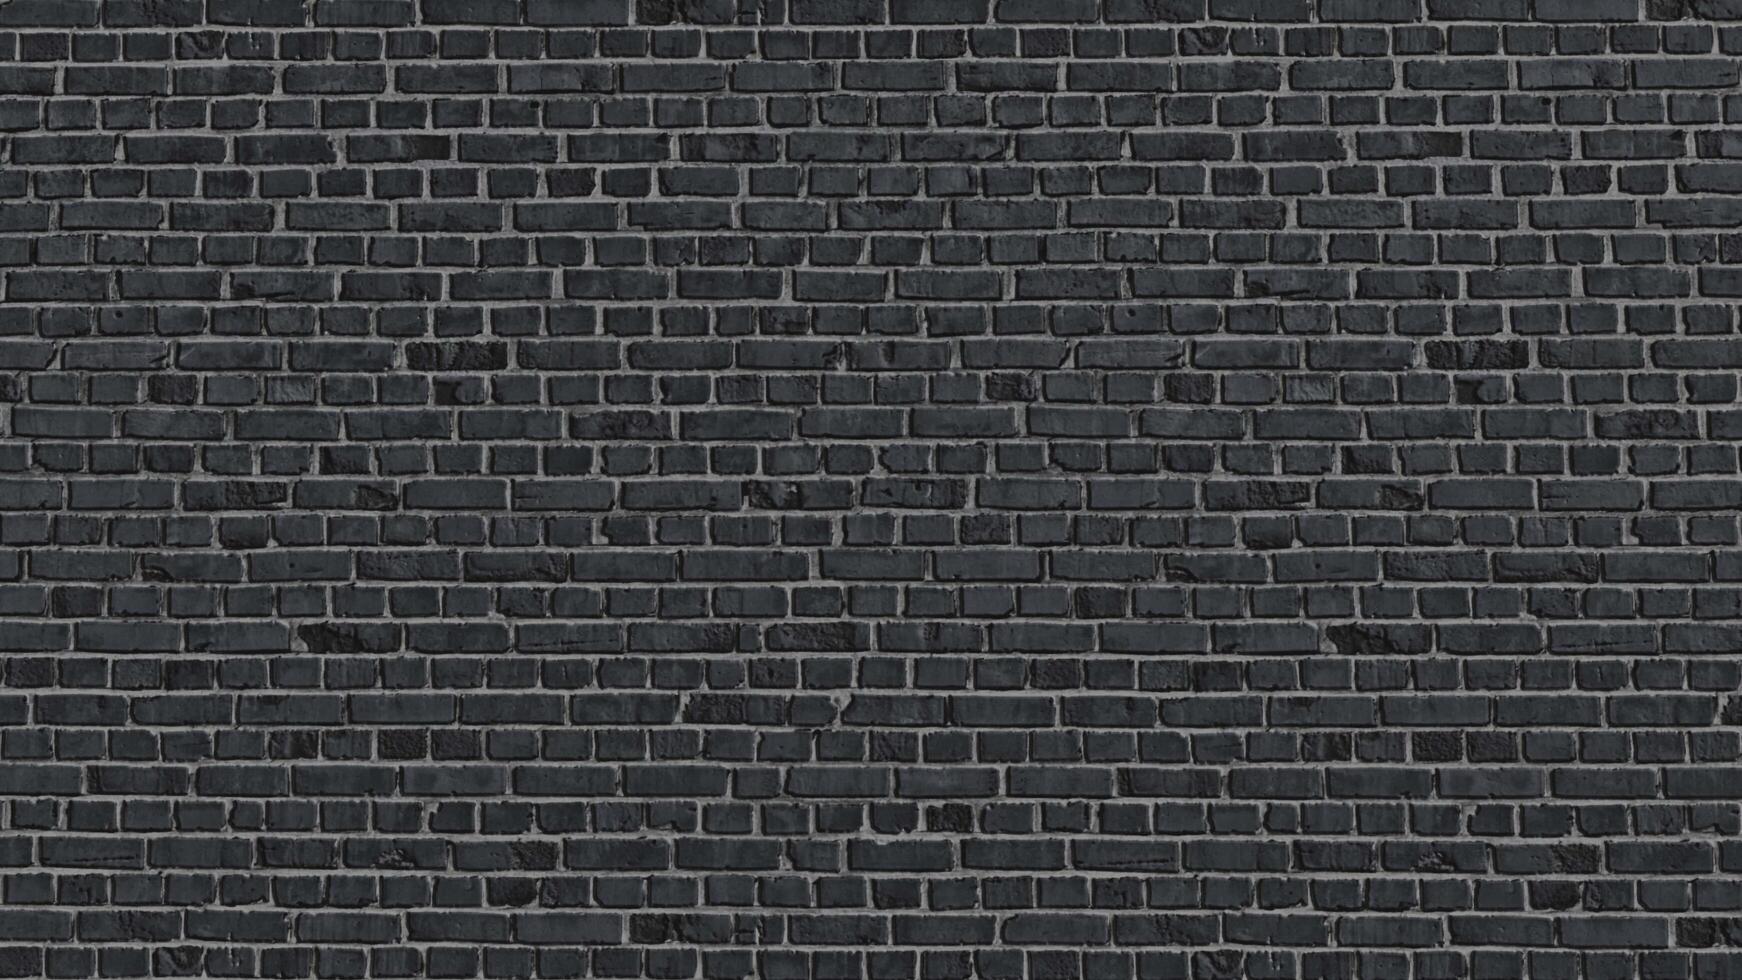 Brick texture black for interior floor and wall materials photo